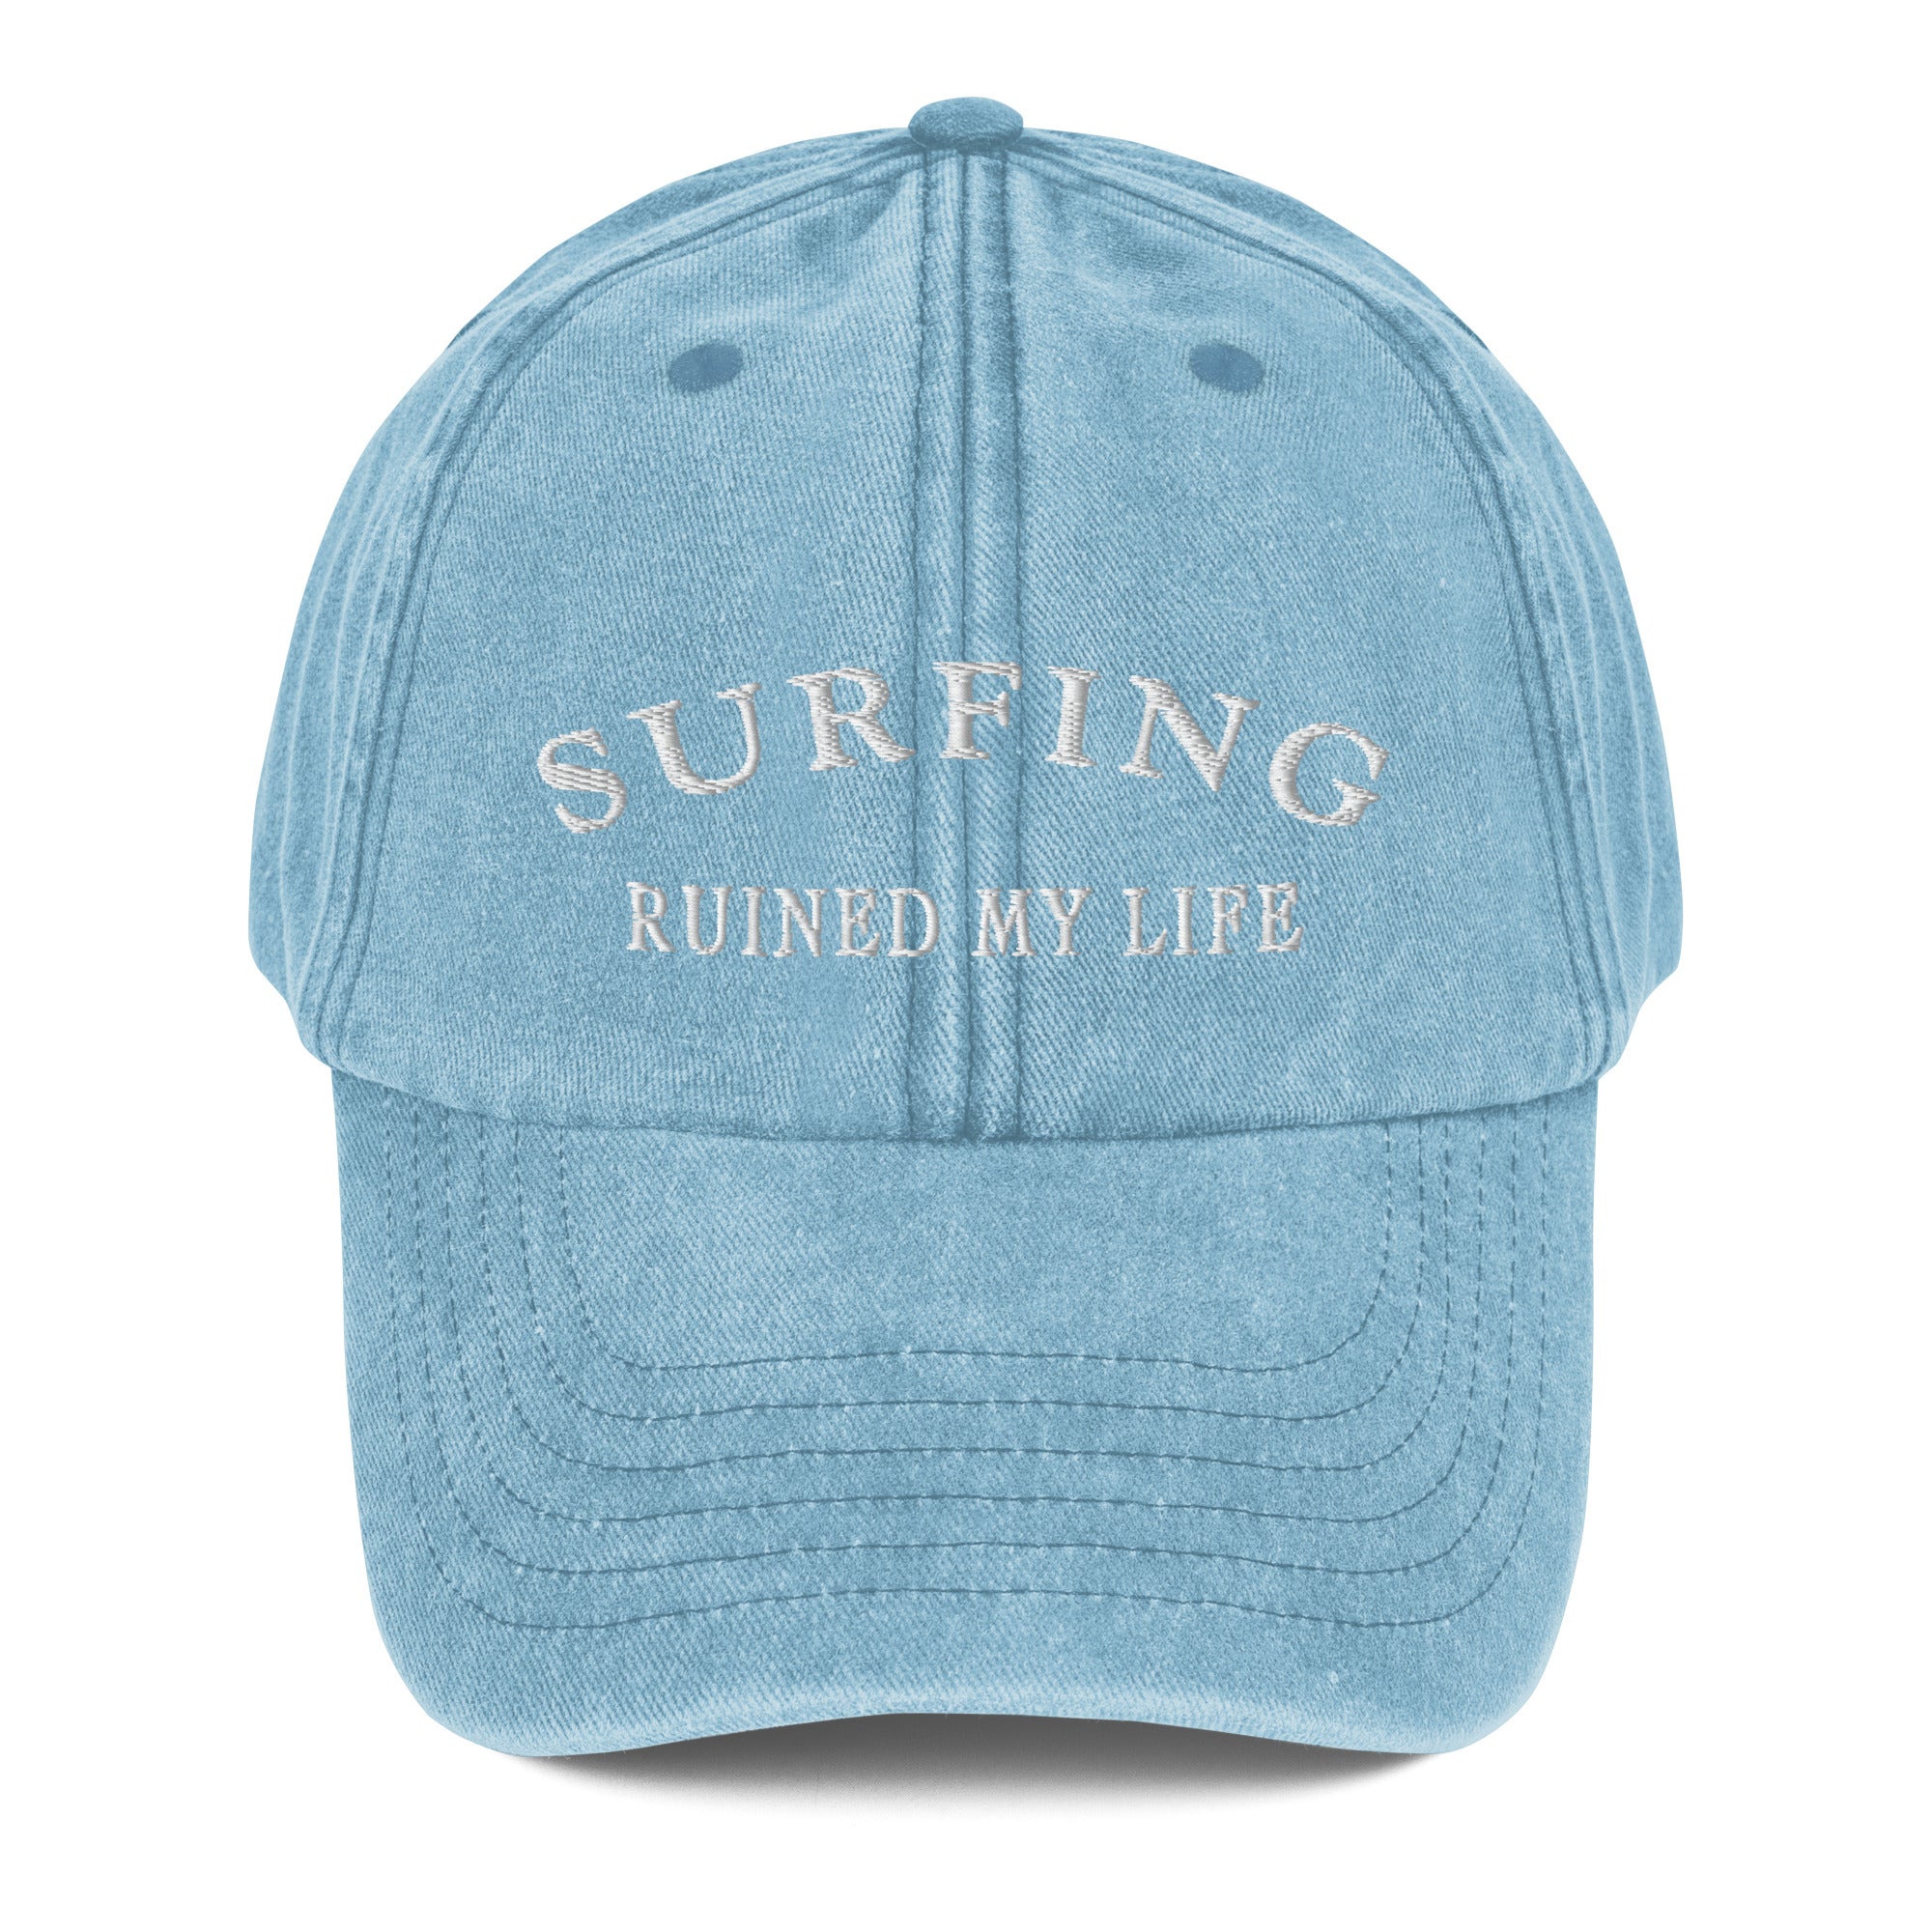 Surfing Ruined My Life {Vintage Cap}